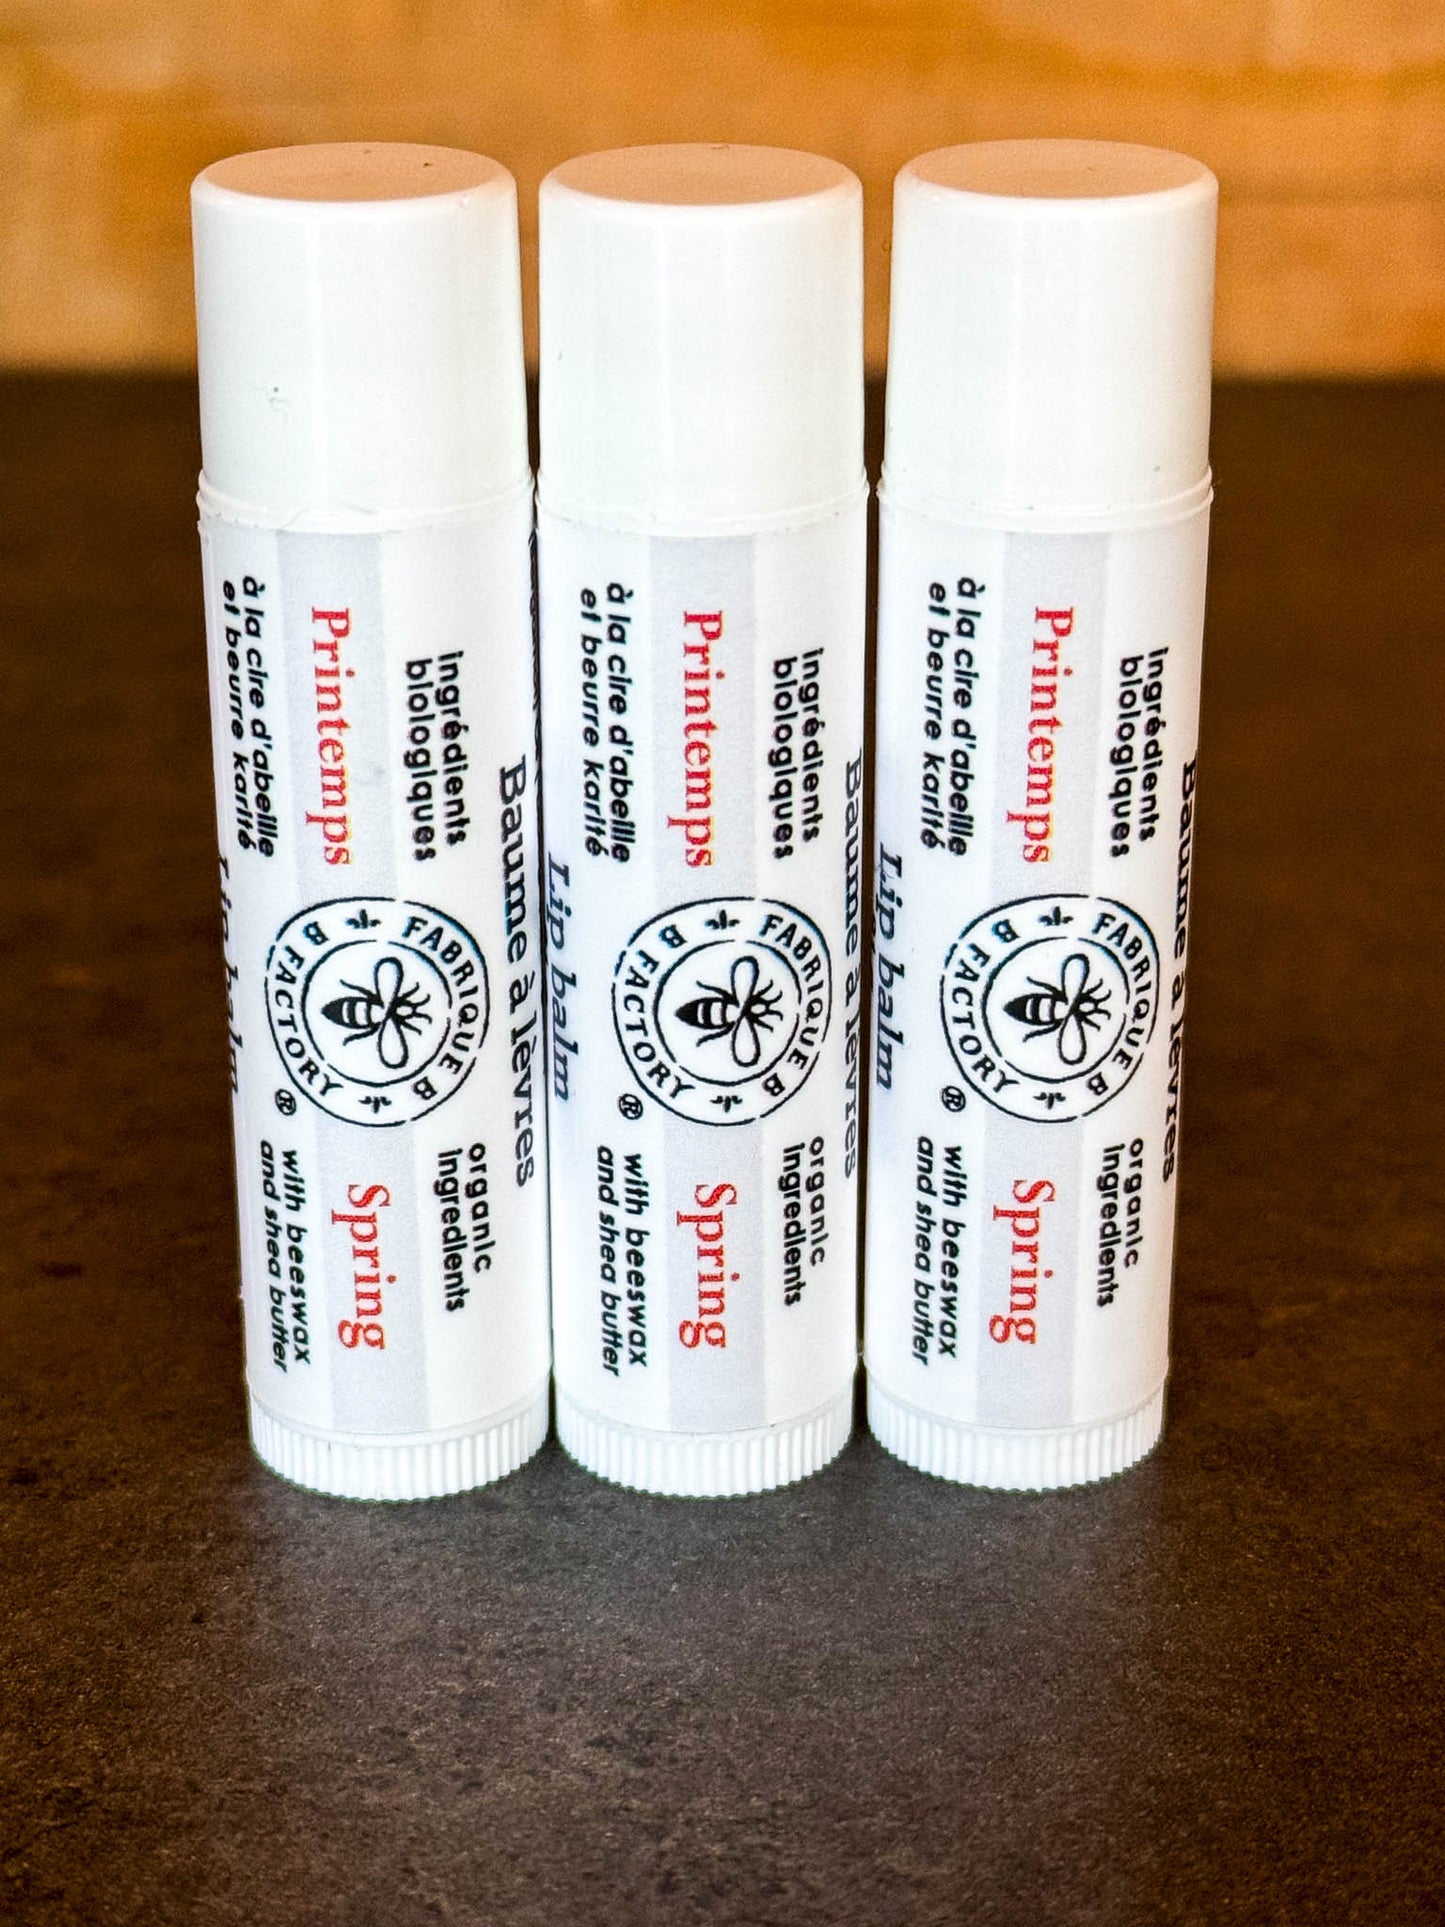 3 "Spring" lip balms by B Factory standing on end, on a dark surface with a wood background